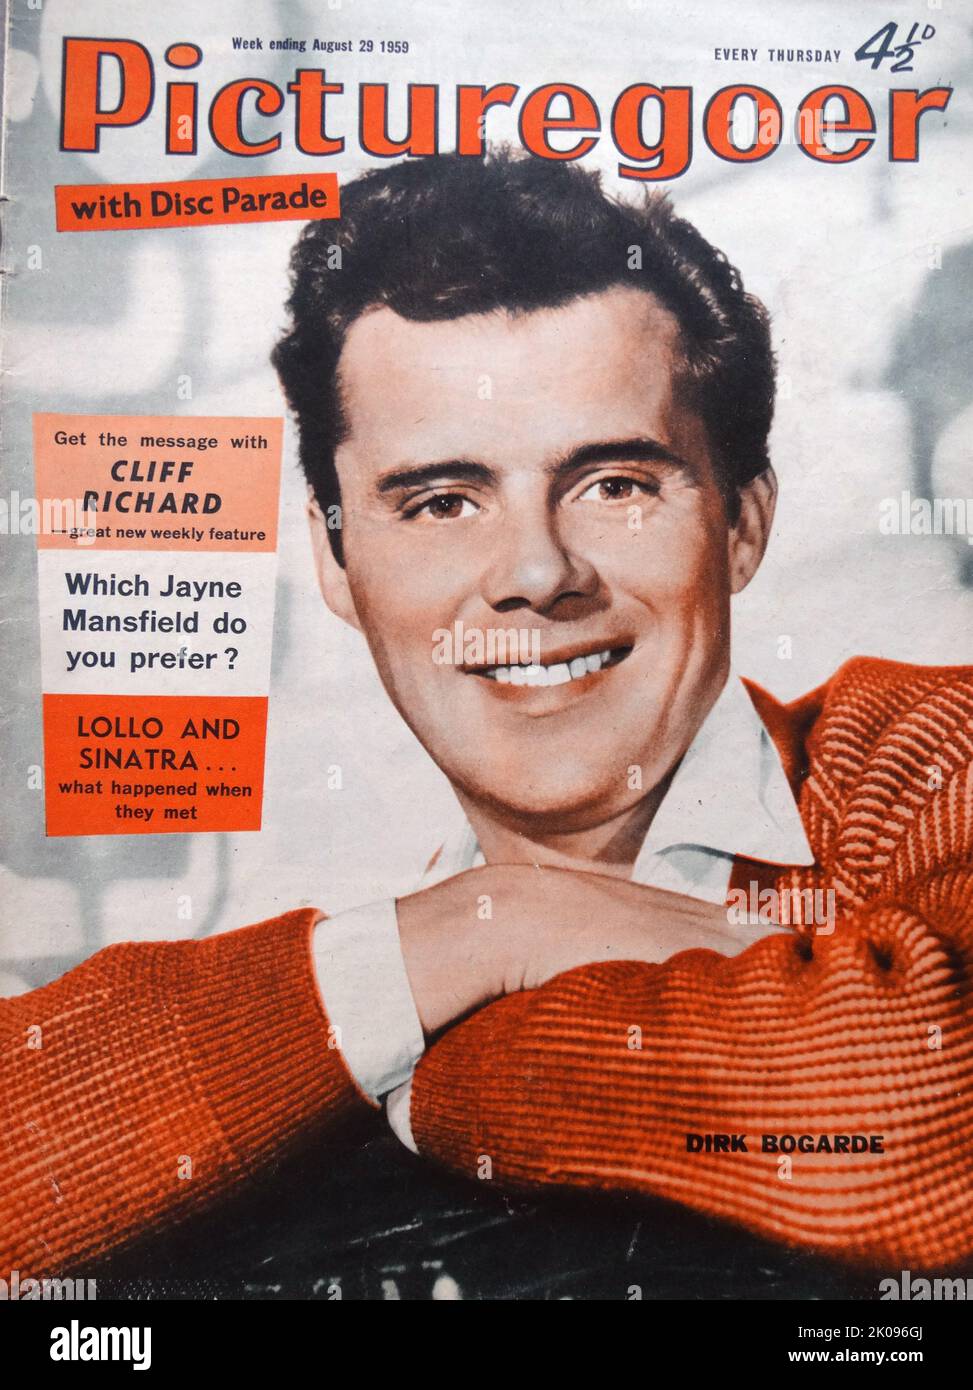 Dirk Bogarde on the front cover of Picturegoer. Sir Dirk Bogarde (born Derek Niven van den Bogaerde; 28 March 1921 - 8 May 1999) was an English actor, novelist and screenwriter. Initially a matinee idol in films such as Doctor in the House (1954), he later acted in art-house films. In a second career, he wrote seven best-selling volumes of memoirs, six novels and a volume of collected journalism. Stock Photo